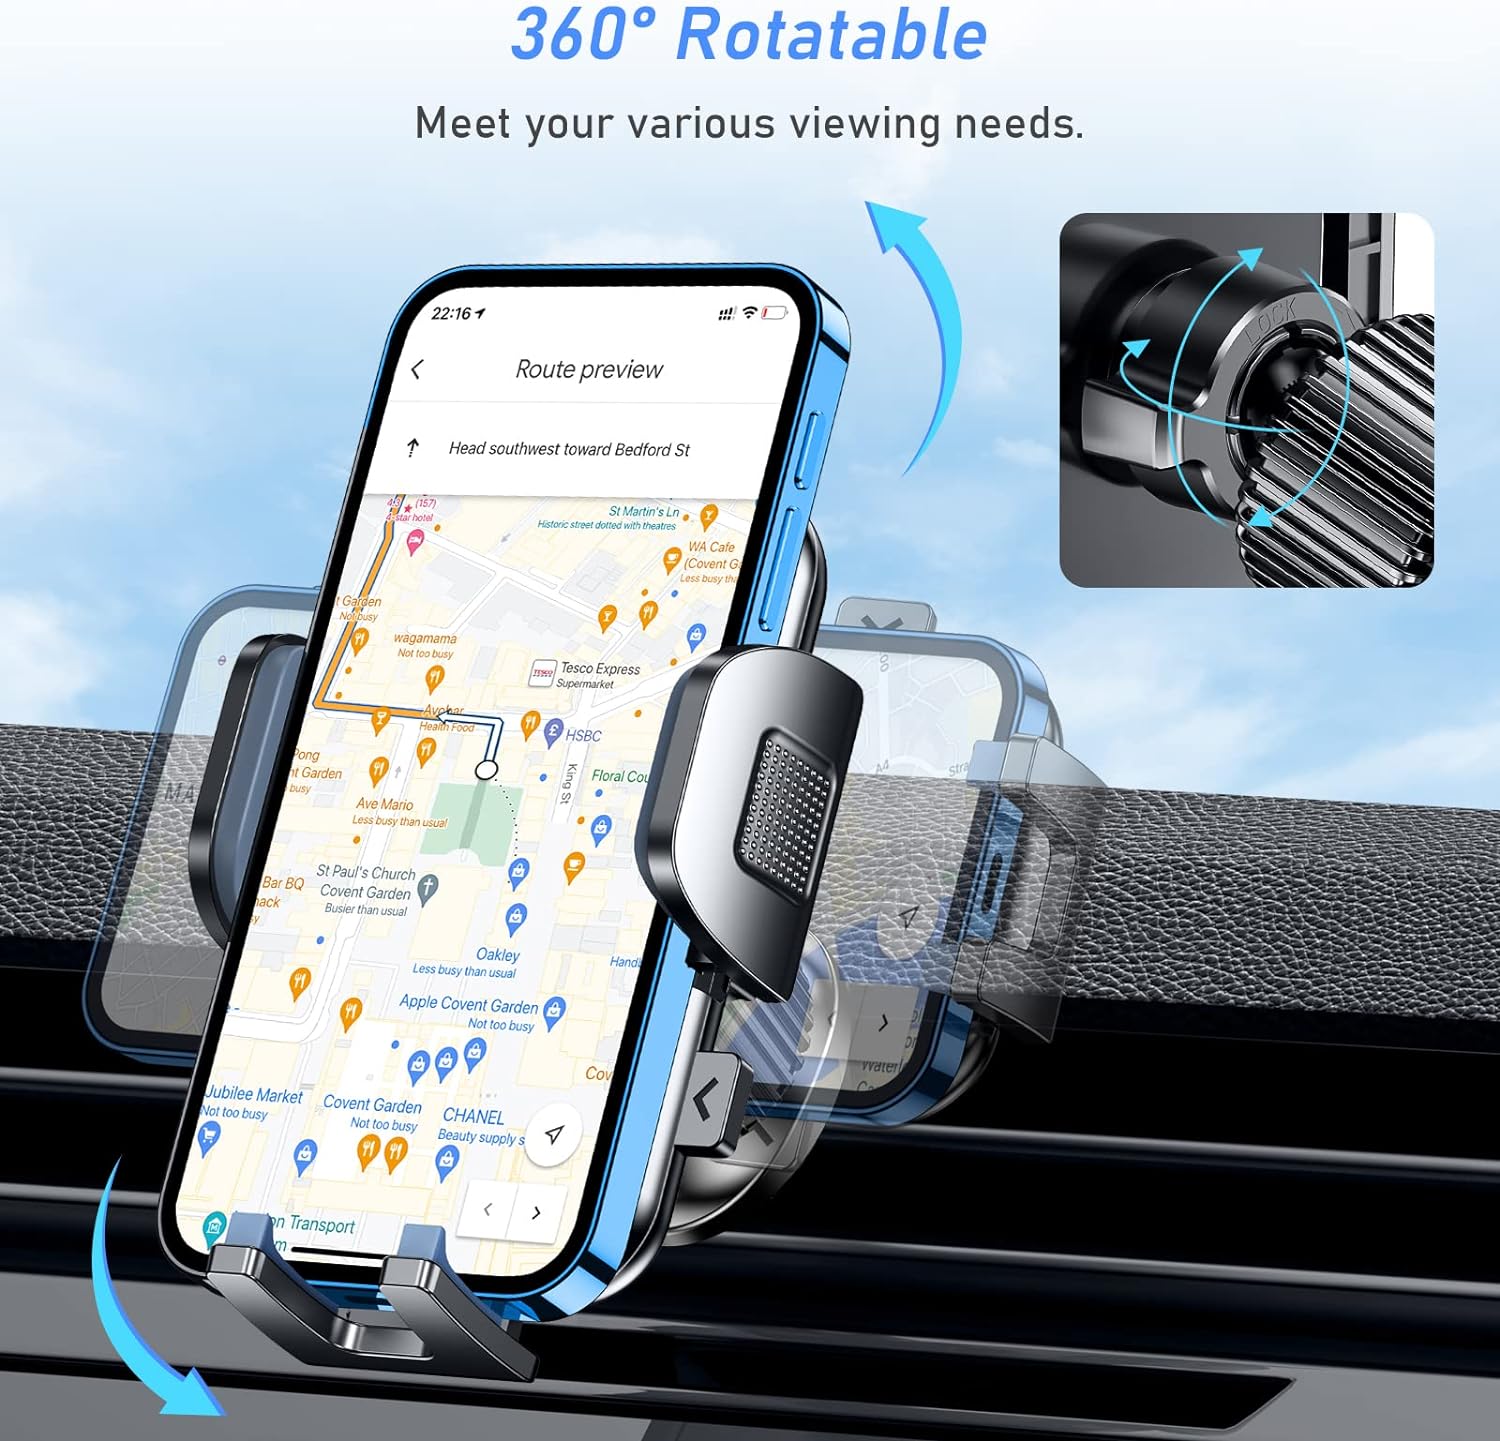 Blukar Car Phone Holder, Air Vent Phone Mount Cradle 360° Rotation - Upgraded Hook Clip and One Button Release Function - Super Stable Compatible with 4.0 to 6.7 inches Phones